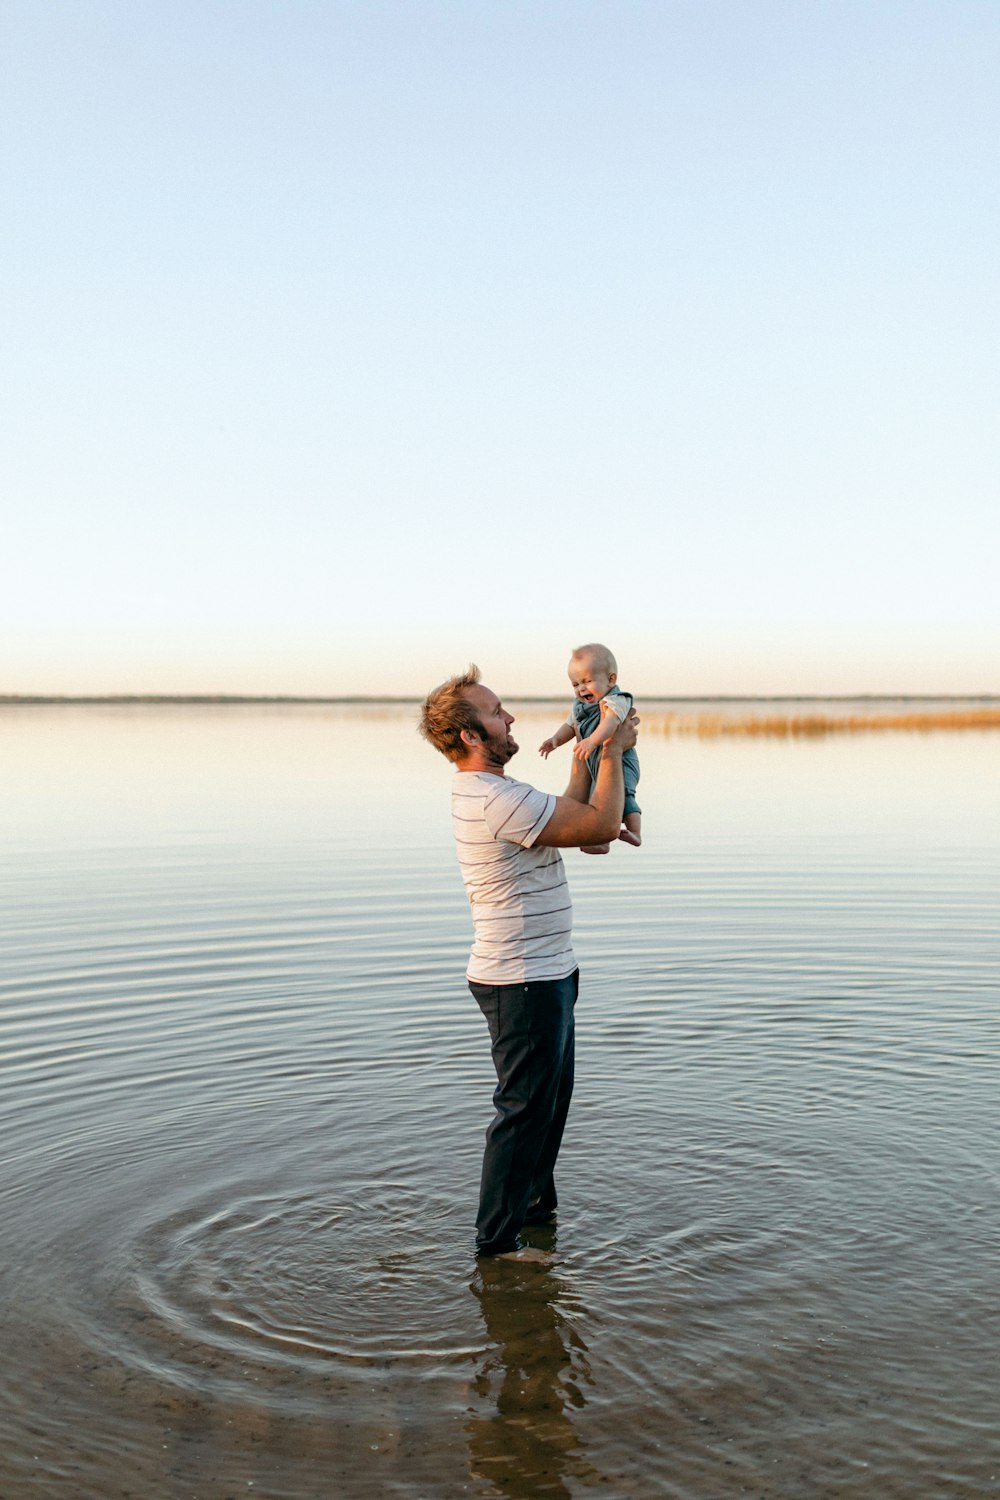 a man holding a baby in the water